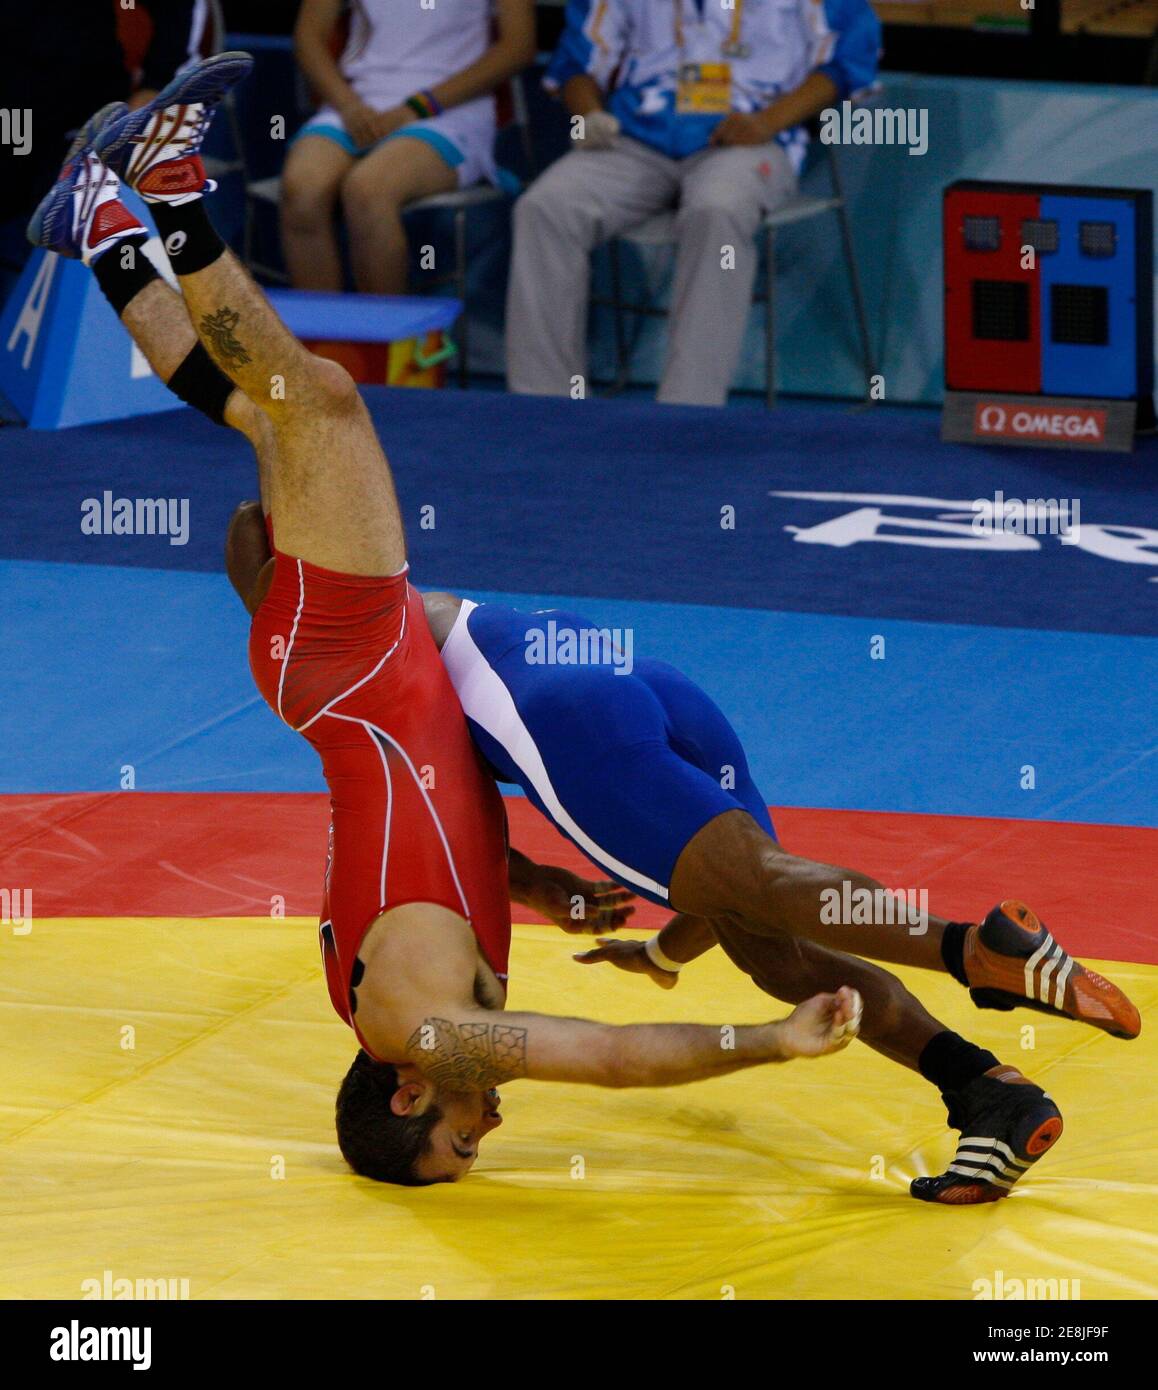 Andy Hrovat of the U.S. (in red) fights Reineris Salas of Cuba in their 84kg men's freestyle wrestling qualification match at the Beijing 2008 Olympic Games, August 21, 2008. REUTERS/Oleg Popov (CHINA) Stock Photo